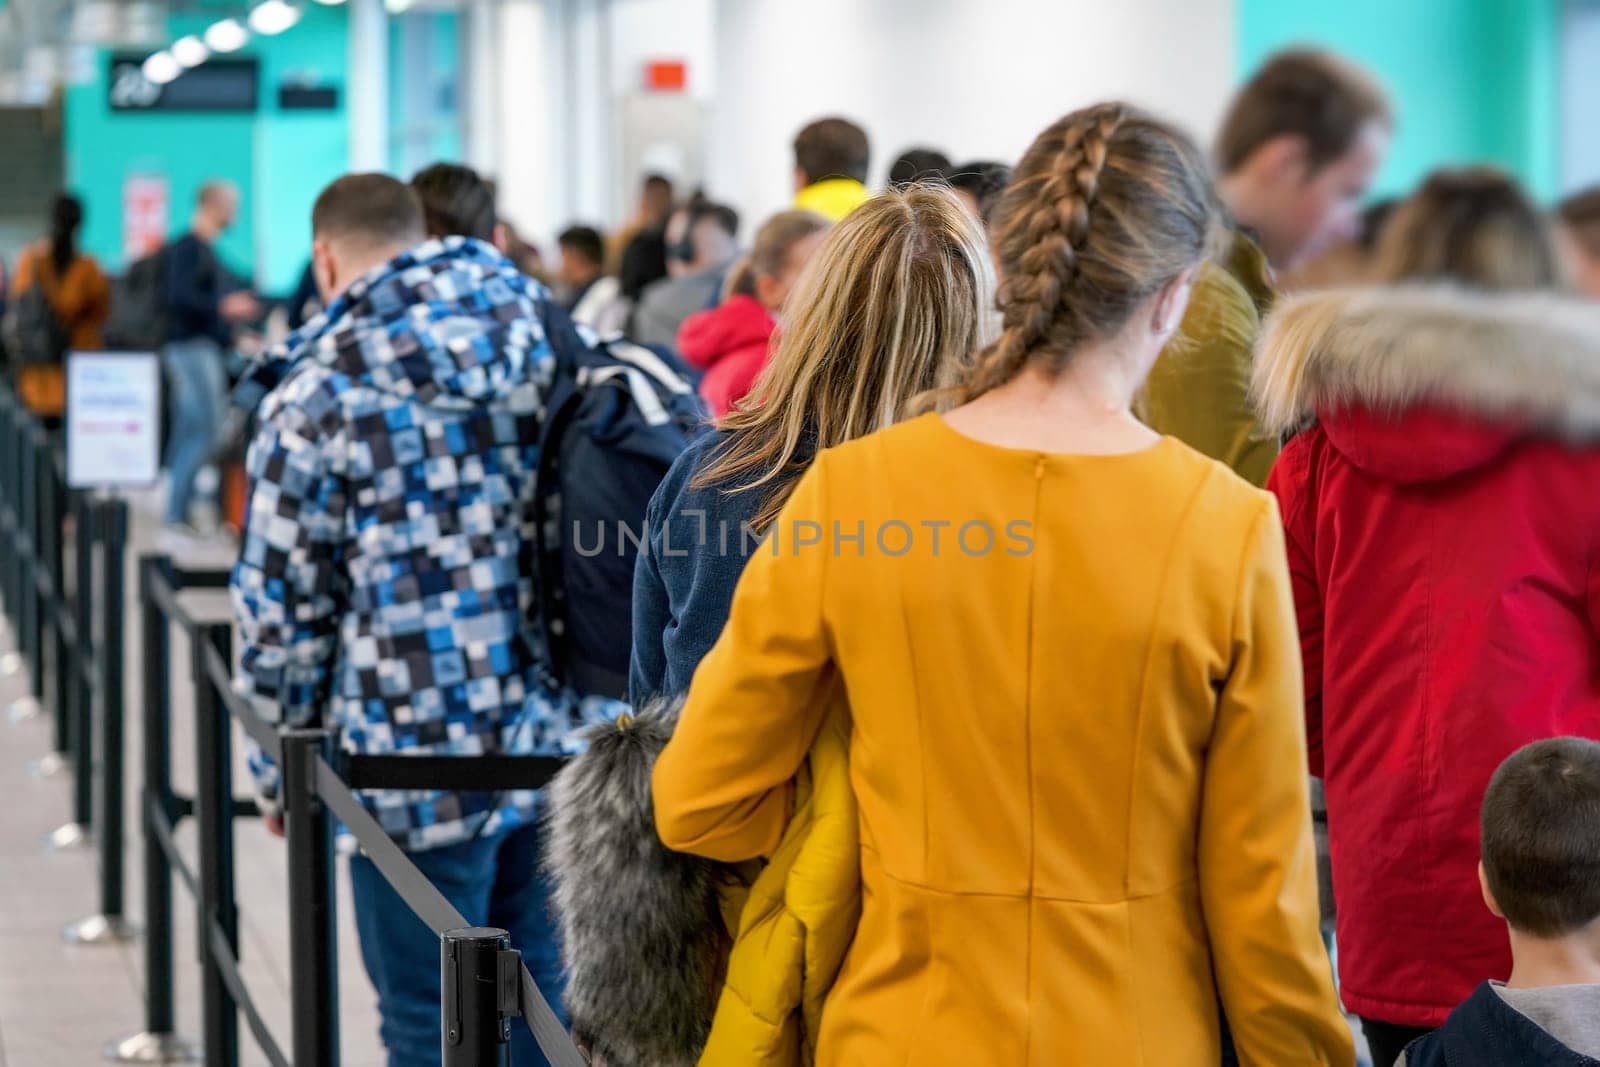 Group of anonymous people waiting at airport gate line to board an airplane, queue crowd seen from behind. by Ivanko